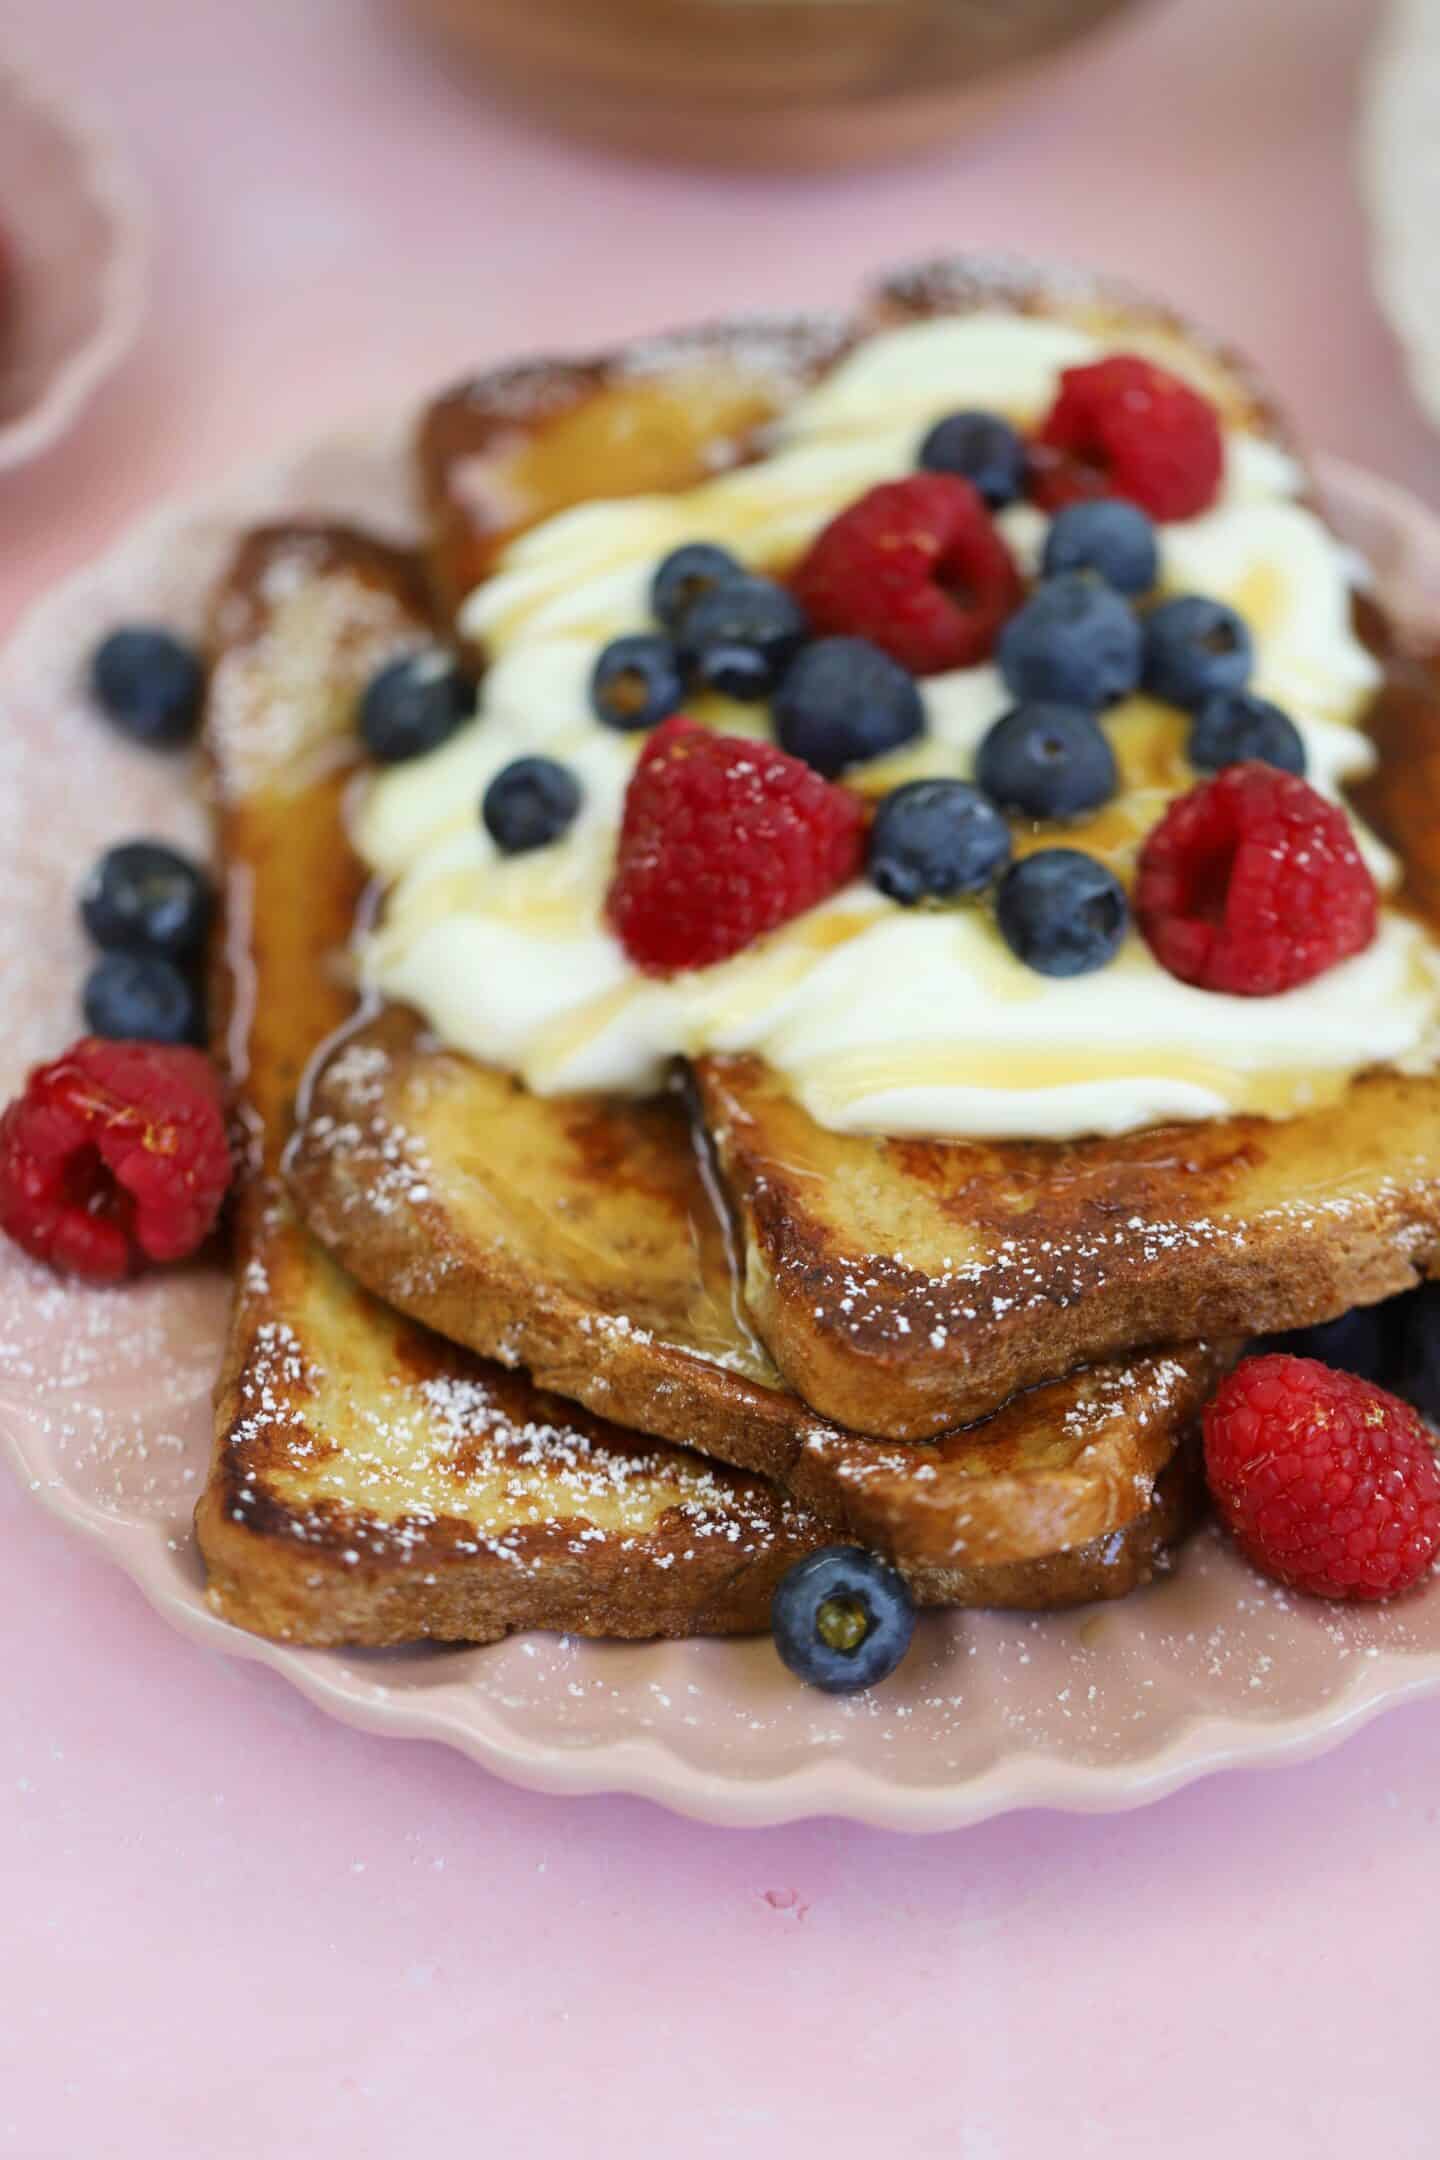 A plate of gluten free French toast with yoghurt and berries on top.